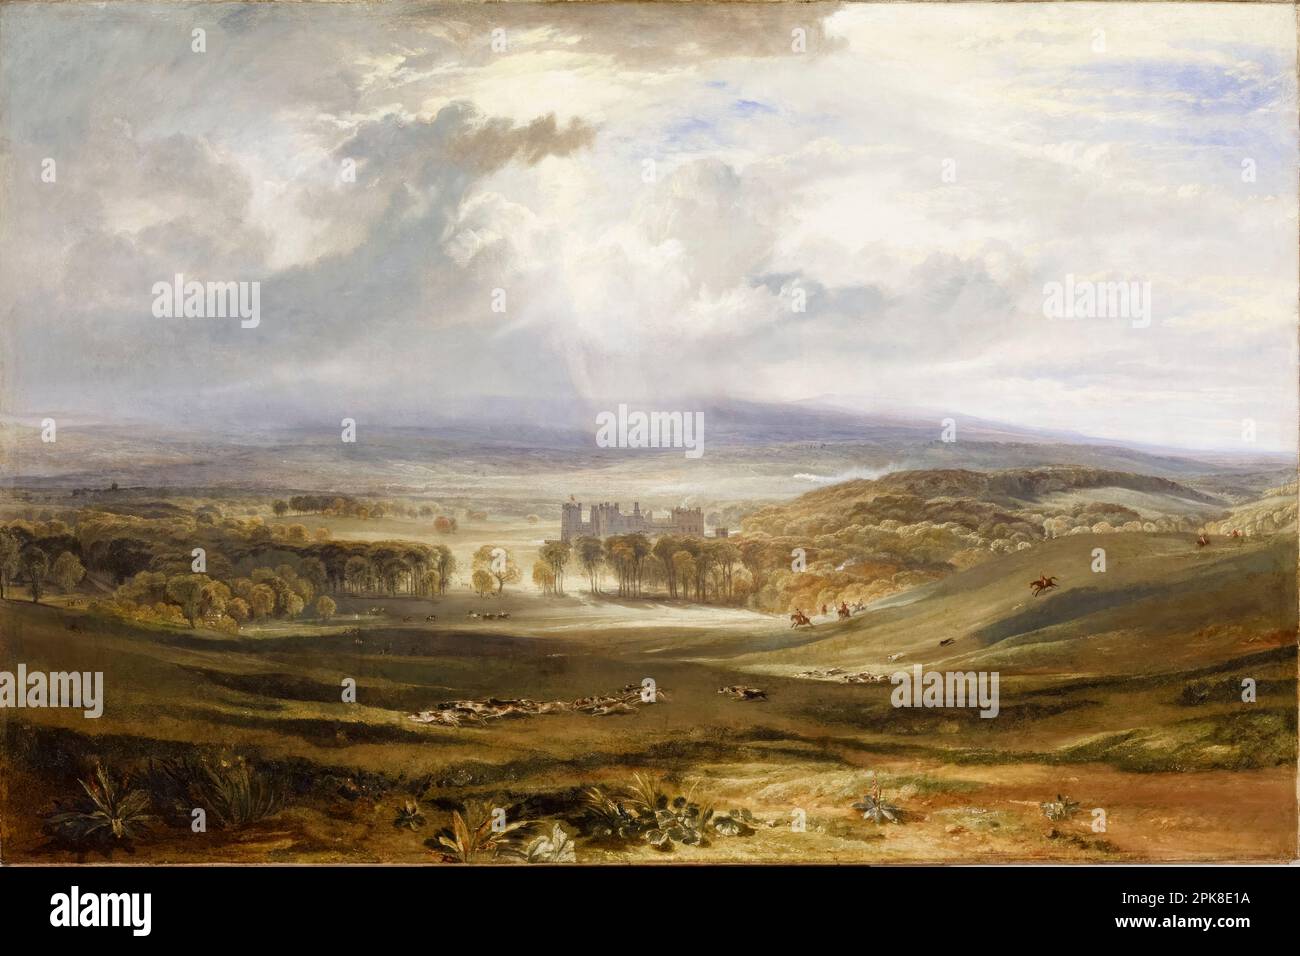 JMW Turner, Raby Castle: the Seat of the Earl of Darlington, landscape painting in oil on canvas, 1817 Stock Photo